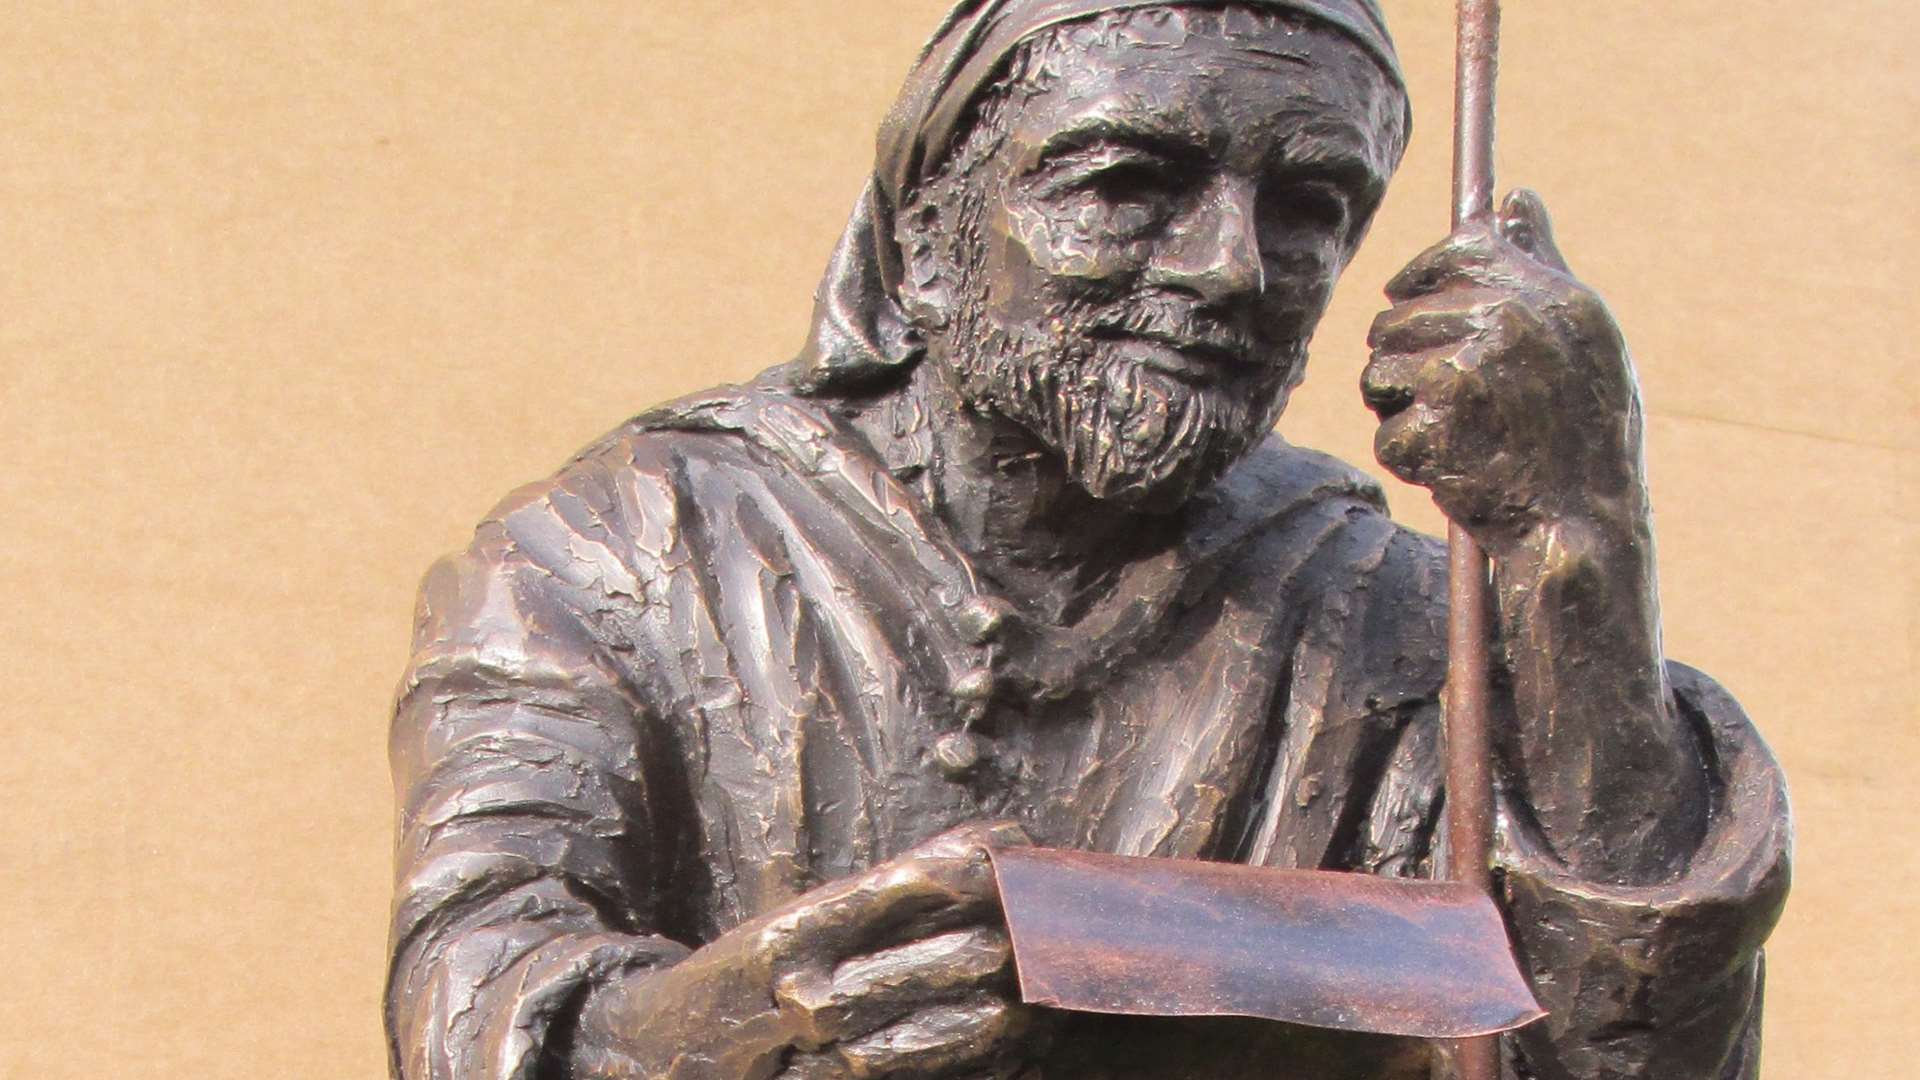 A maquette - or scale model - of what the sculpture of Geoffrey Chaucer looks like